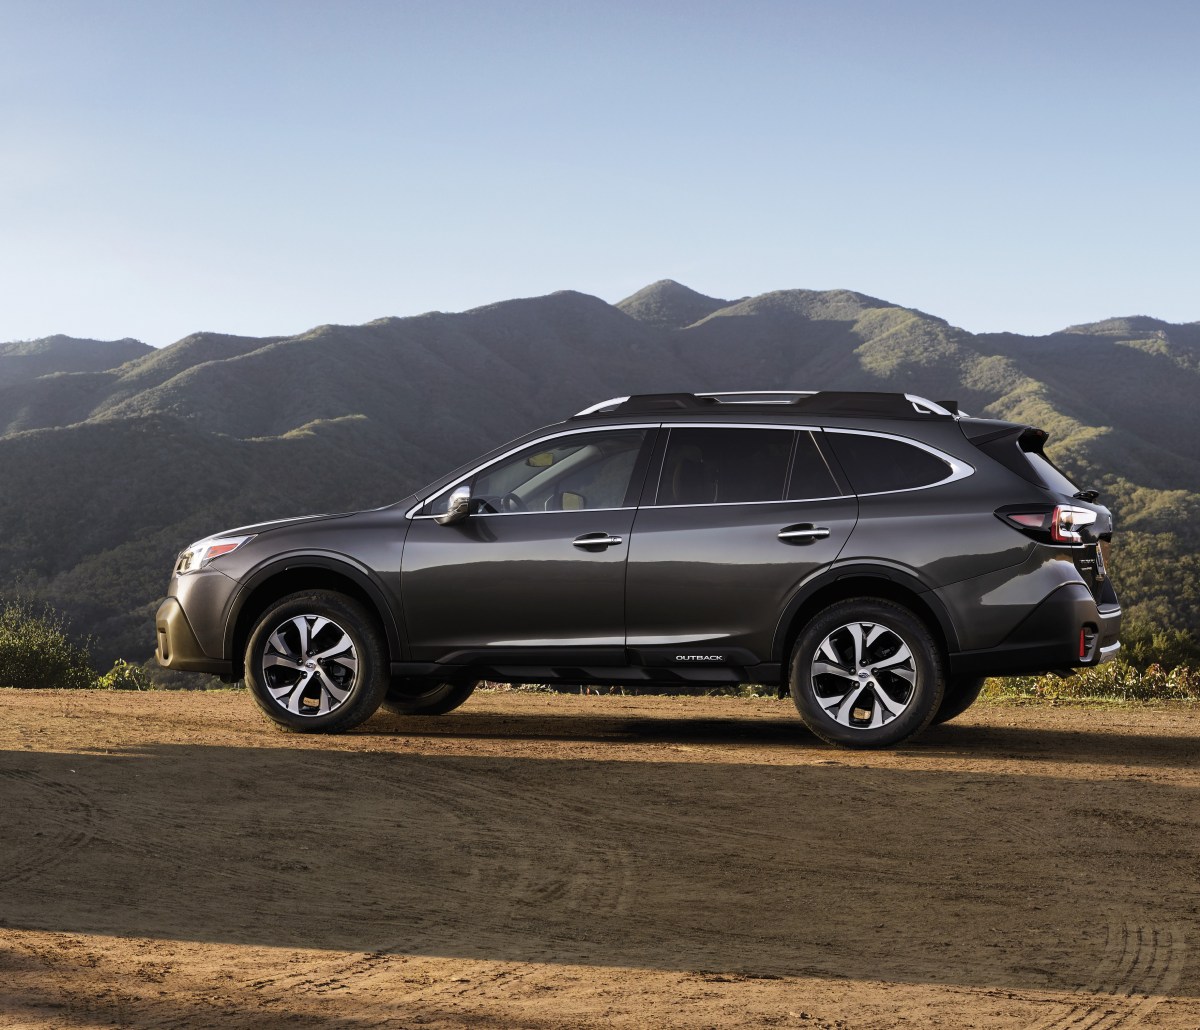 A profile view of a grey Subaru Outback in front of mountains.